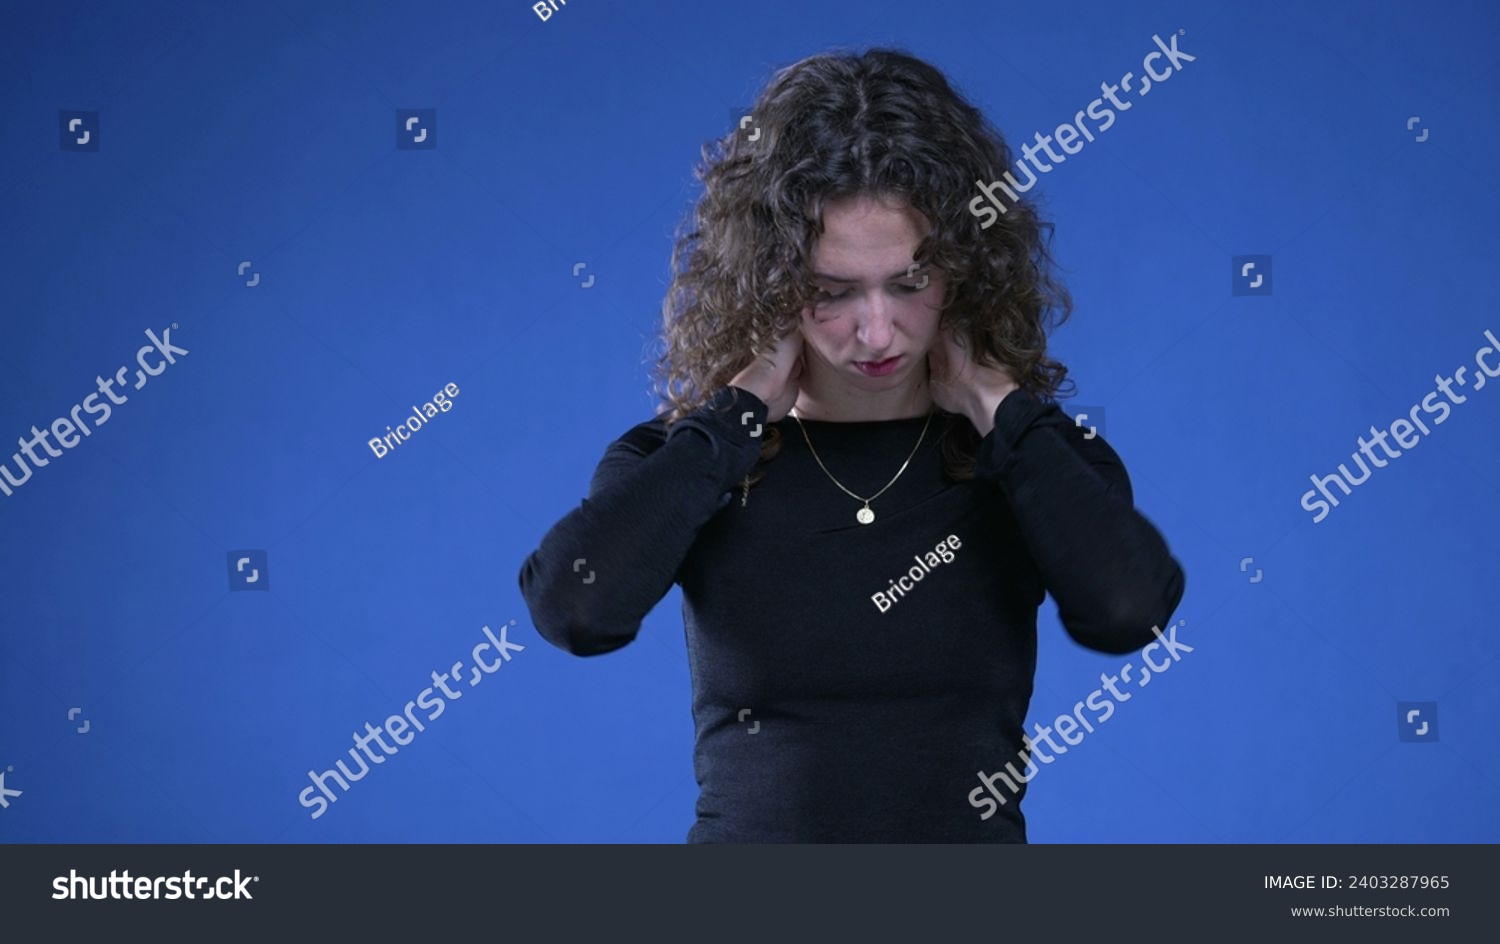 Stressed young woman rubbing neck trying to appease mental anguish while standing on blue background #2403287965